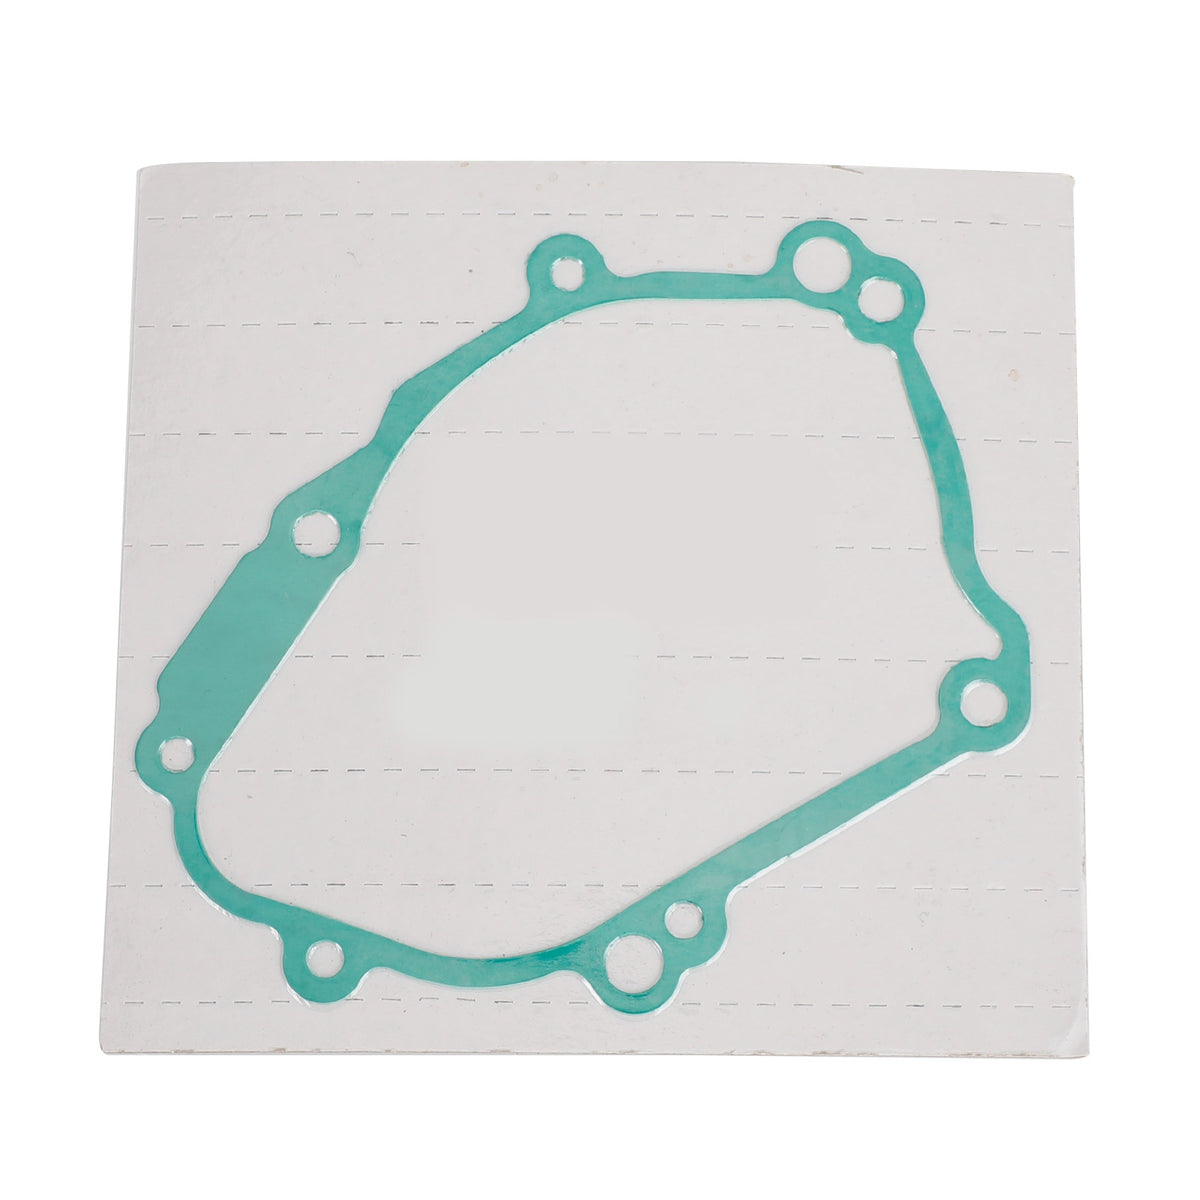 2004-2015 Yamaha YZF R1 R1S FZ1 FZ8 N NA S SA Left side Engine Crankcase Cover Gasket 5VY-15451-00 5VY-15451-10 2D1-15451-10